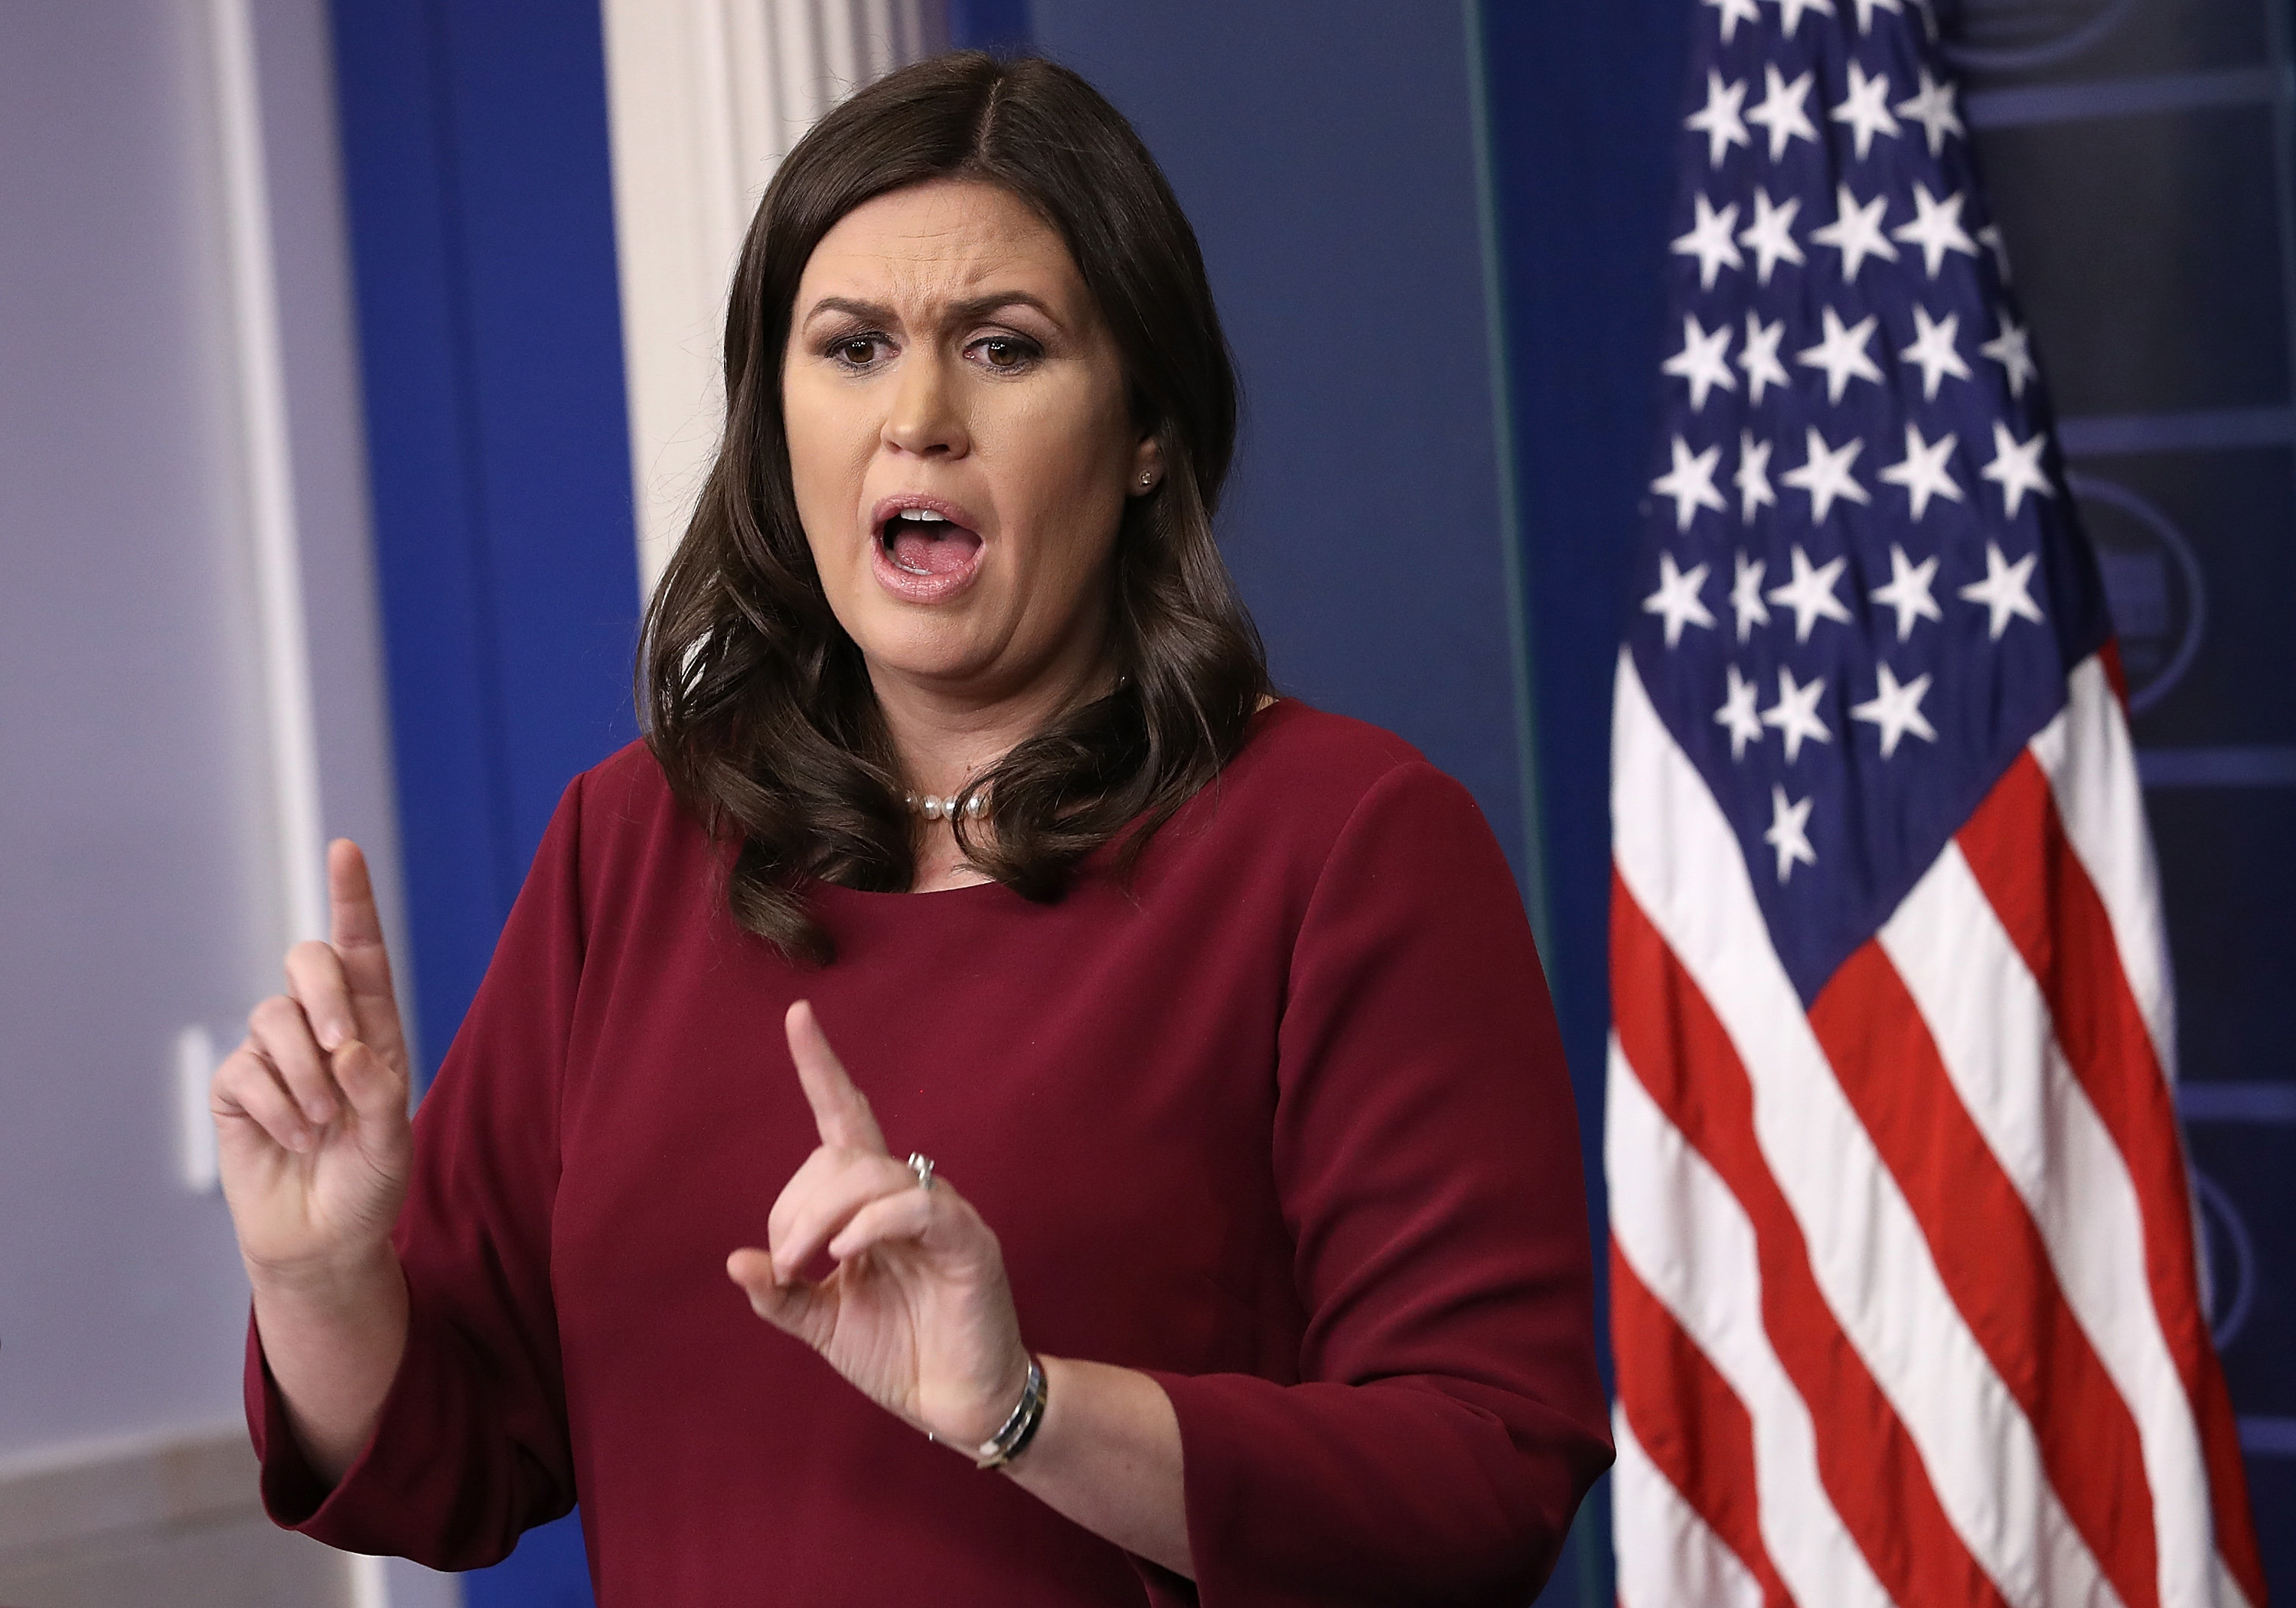 <strong>Sarah Sanders appeared to lose her cool during today's press briefing.&nbsp;</strong>